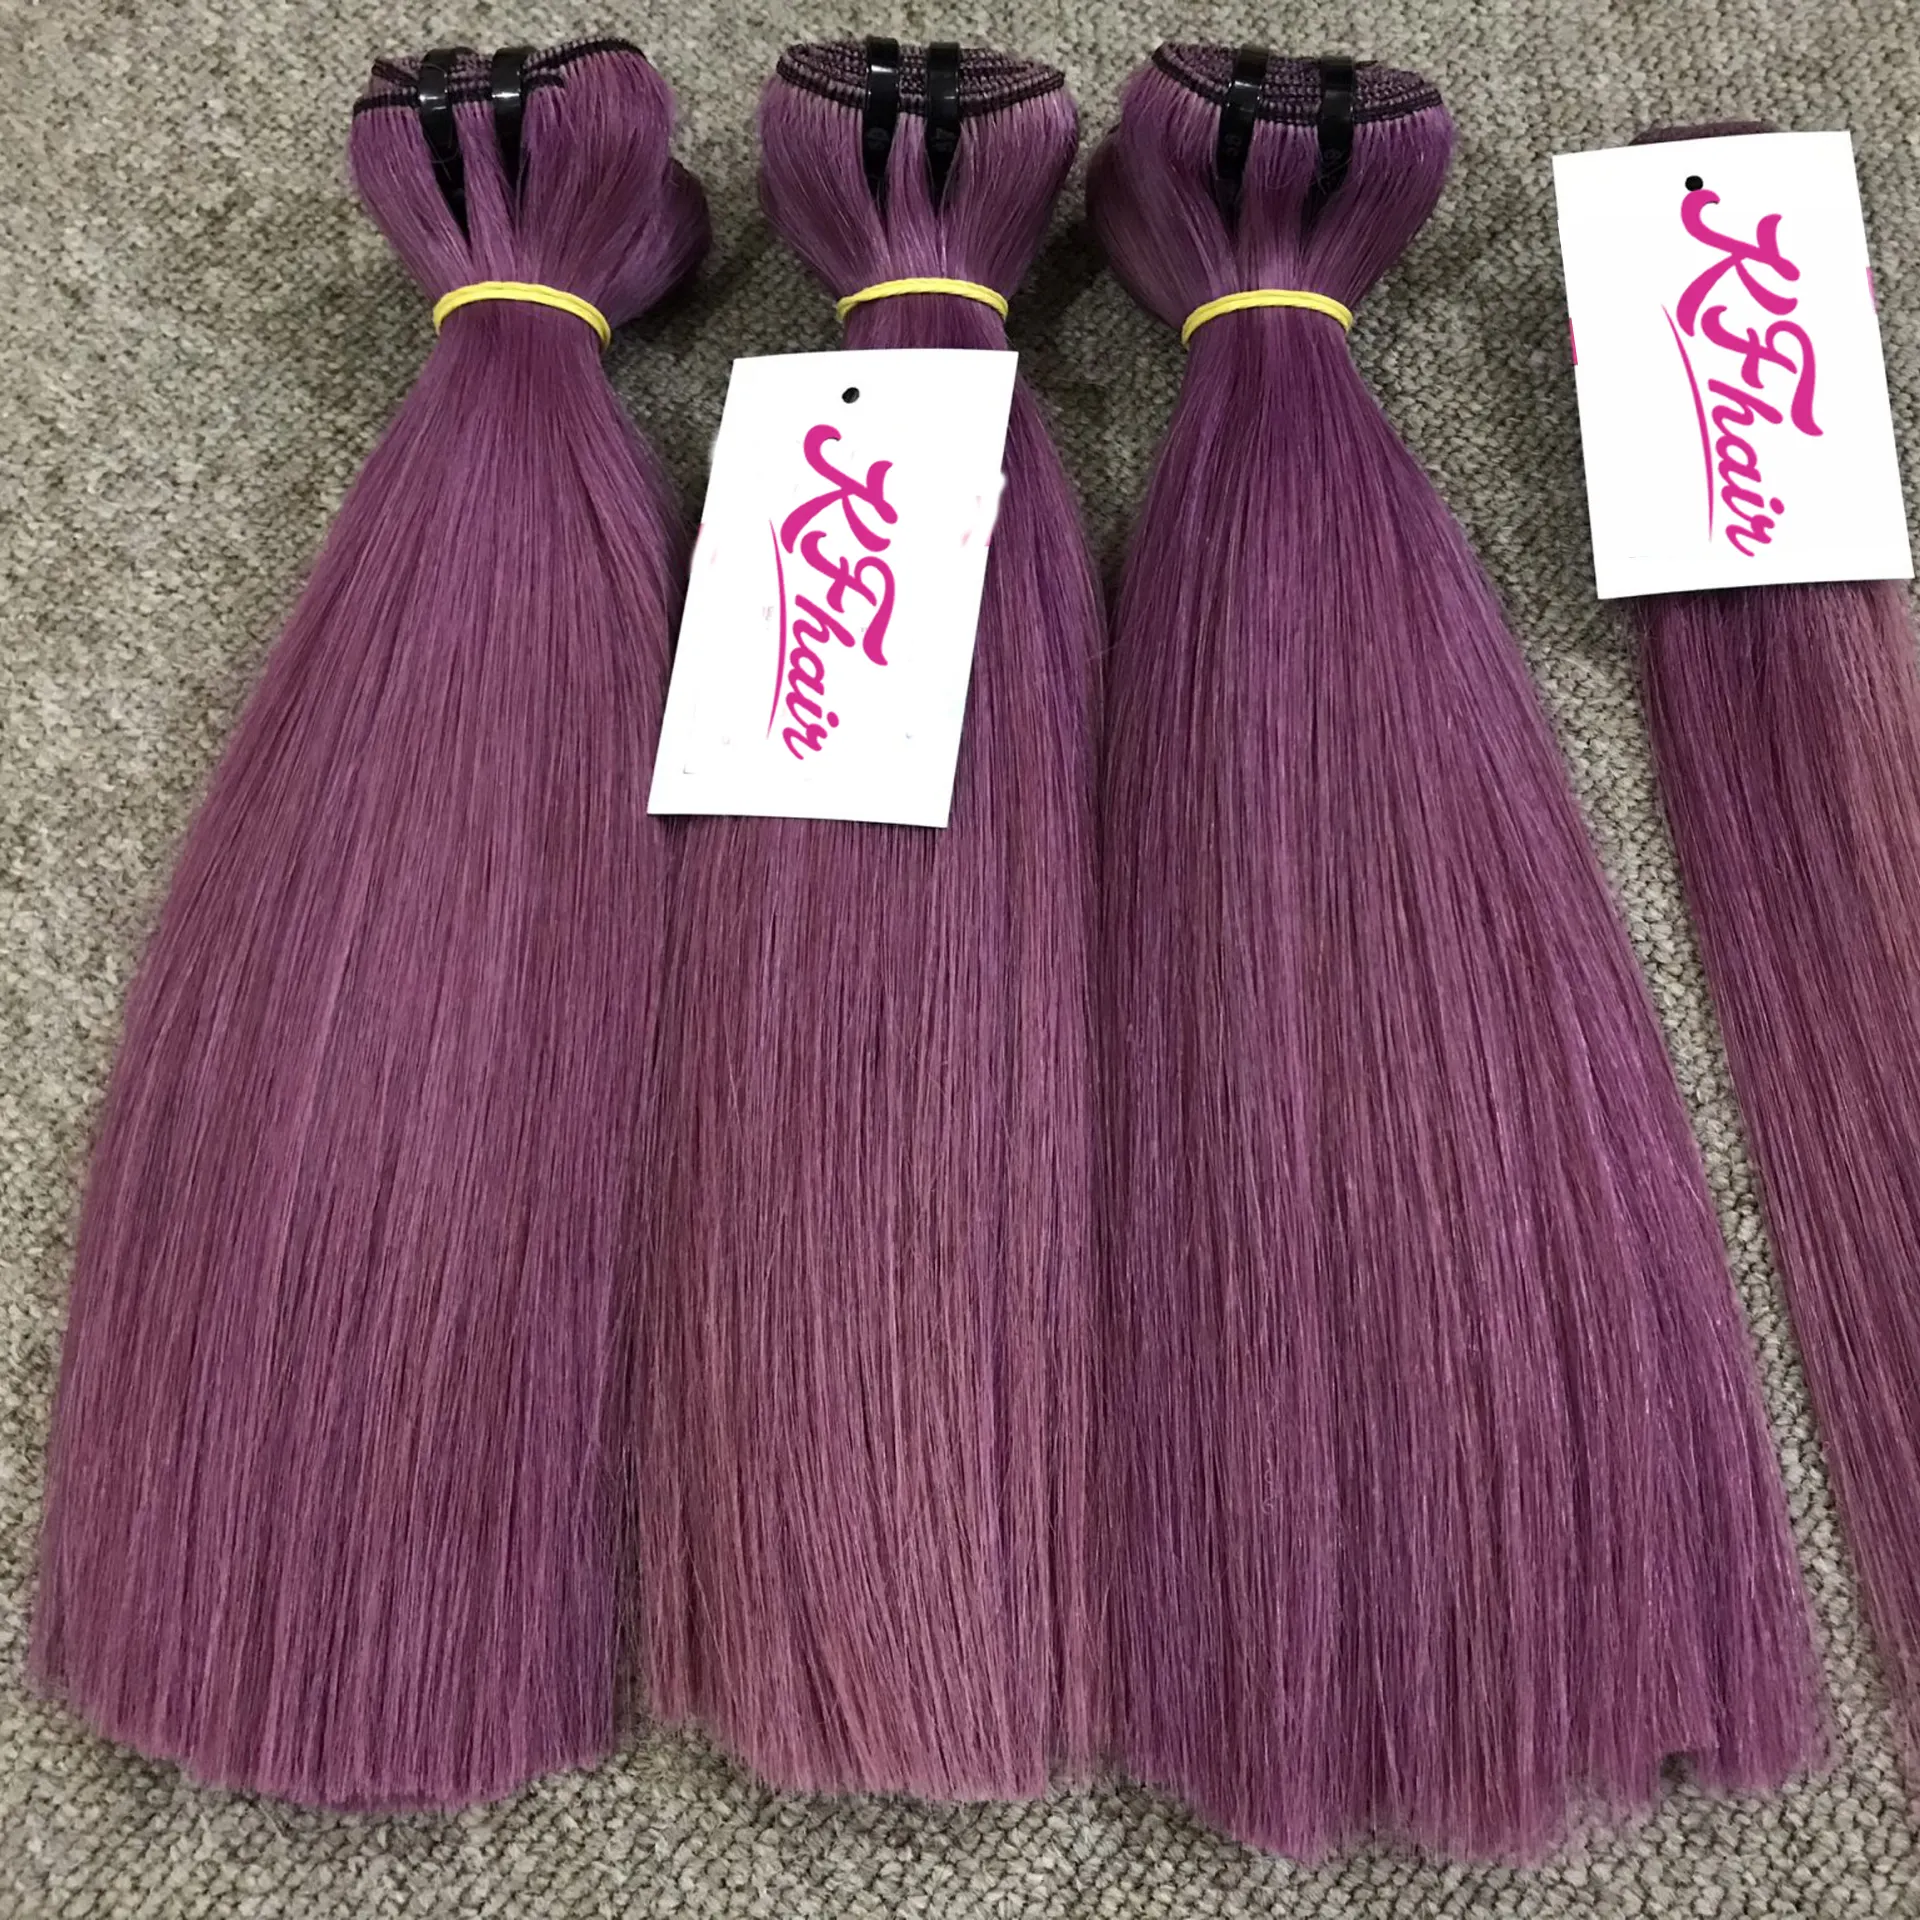 Hot seller hair products for Valentine season 100% human hair extensions purple color remy hair no chemical